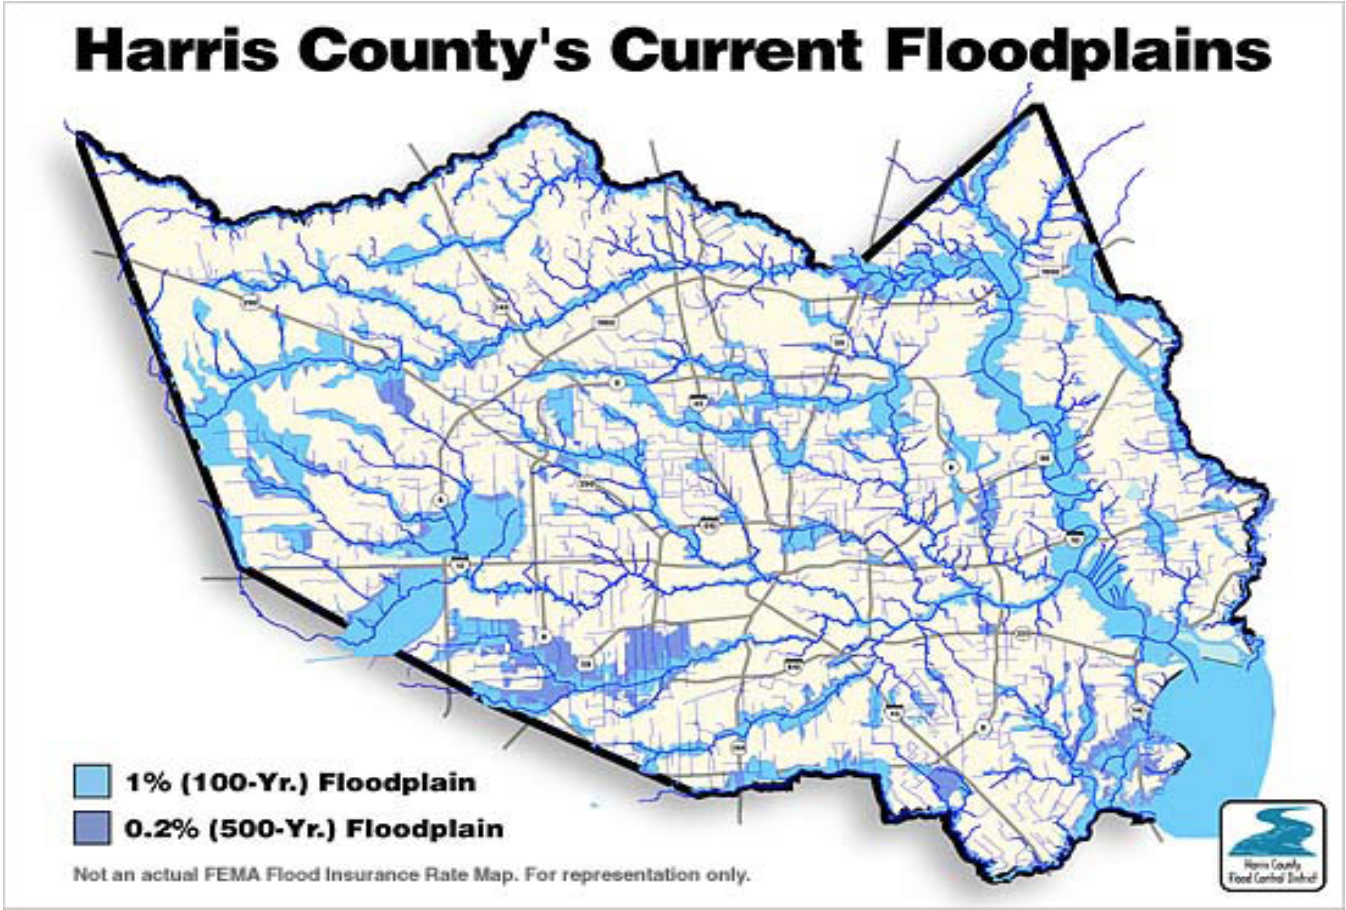  A 2013 map of the estimated 100-year and 500-year floodplains for Harris County, where Houston is located. Army Corps of Engineers, “National Economic Development: Flood Risk Management,” 2013. 